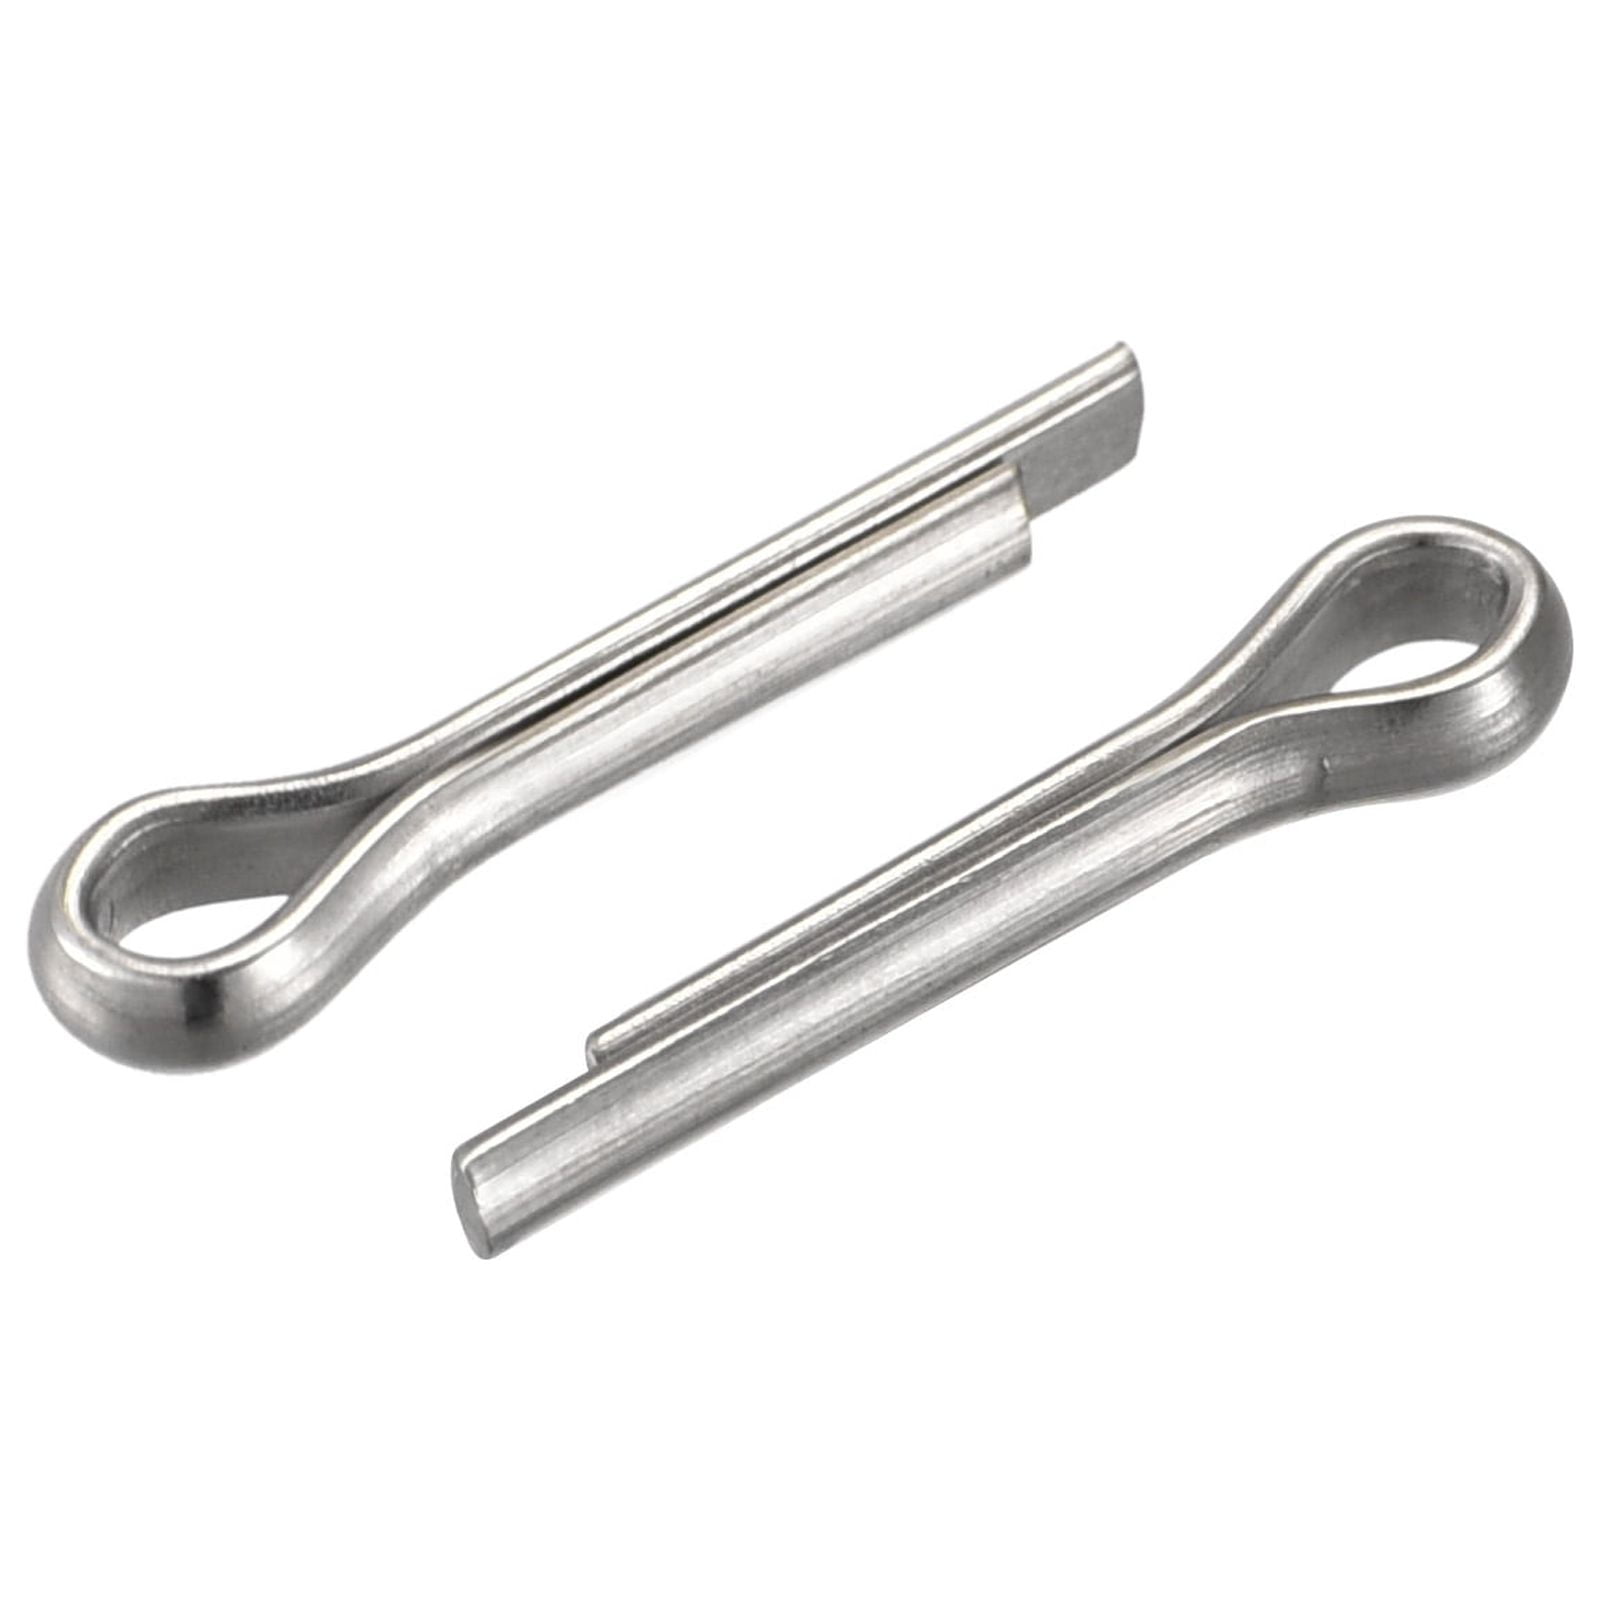 90 mm Stainless Steel Cotter Pin Refills